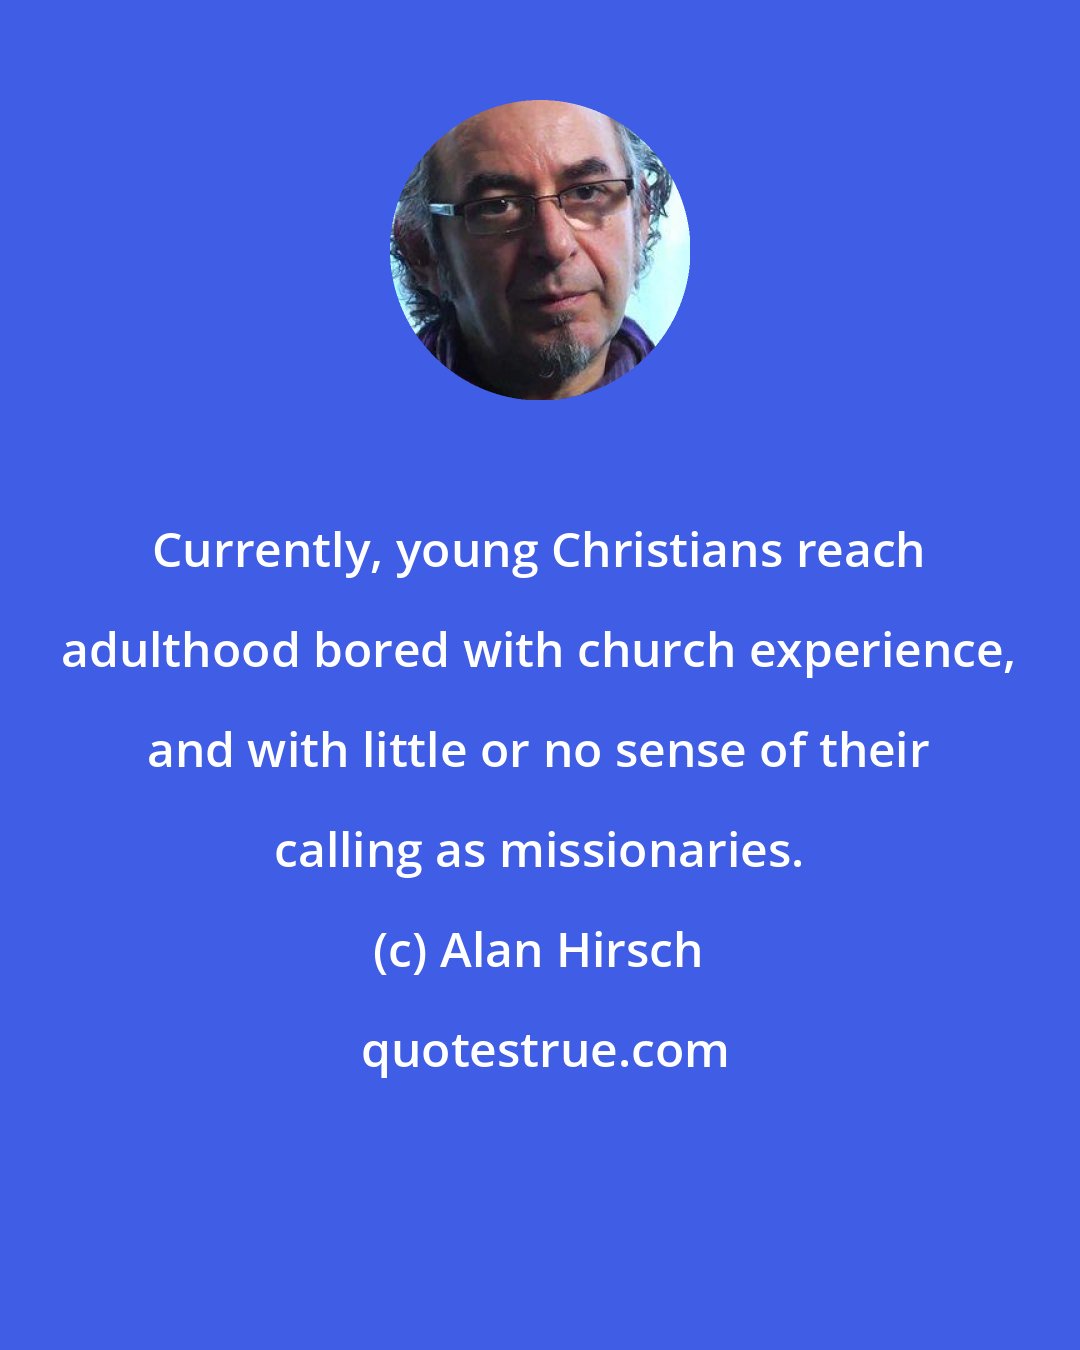 Alan Hirsch: Currently, young Christians reach adulthood bored with church experience, and with little or no sense of their calling as missionaries.